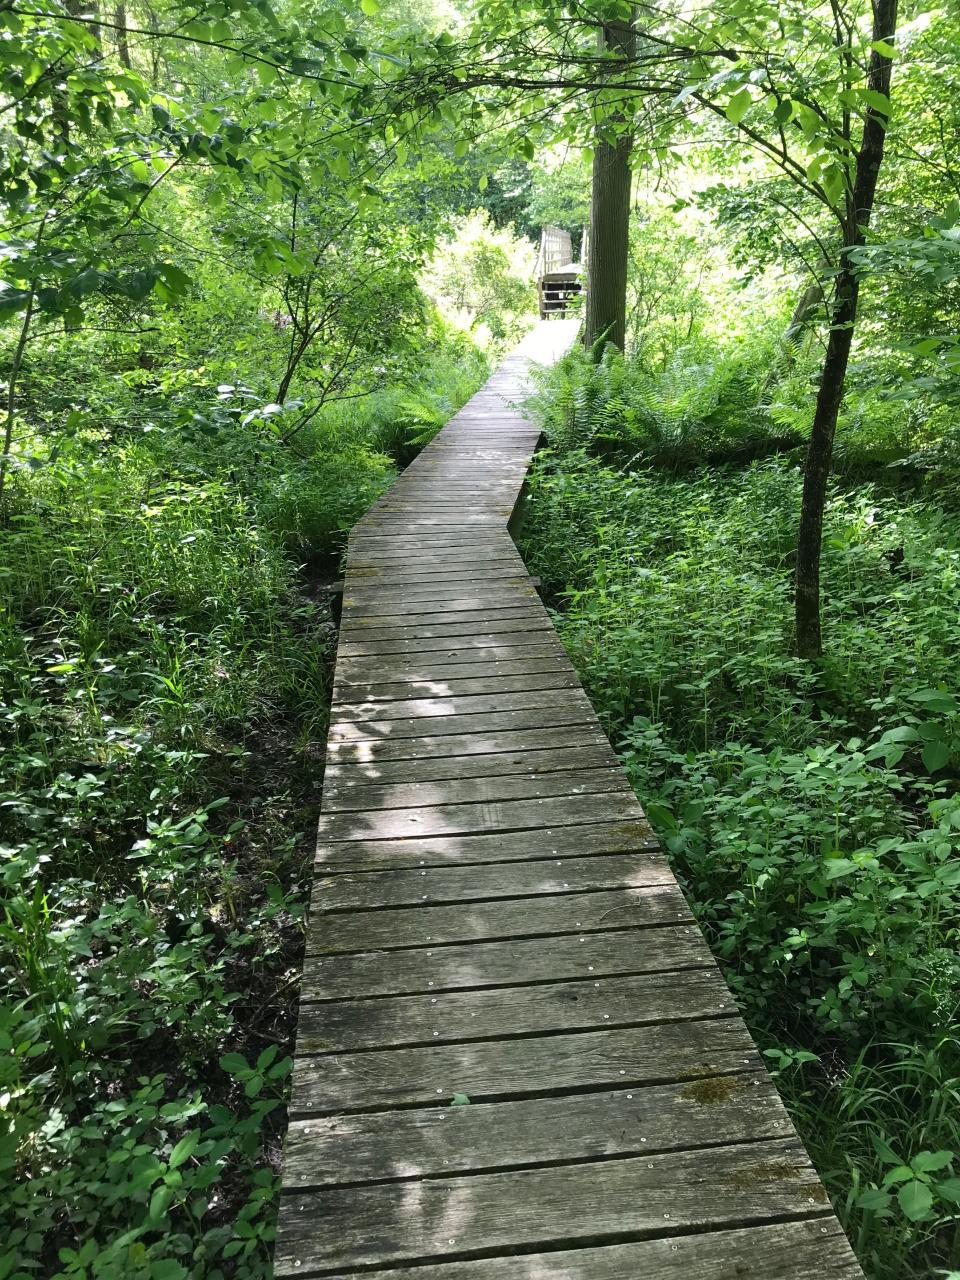 Hikers can spot animal tracks in the mud below long, wooden-slat boardwalks above wooded swamps and the Tomaquag Brook.